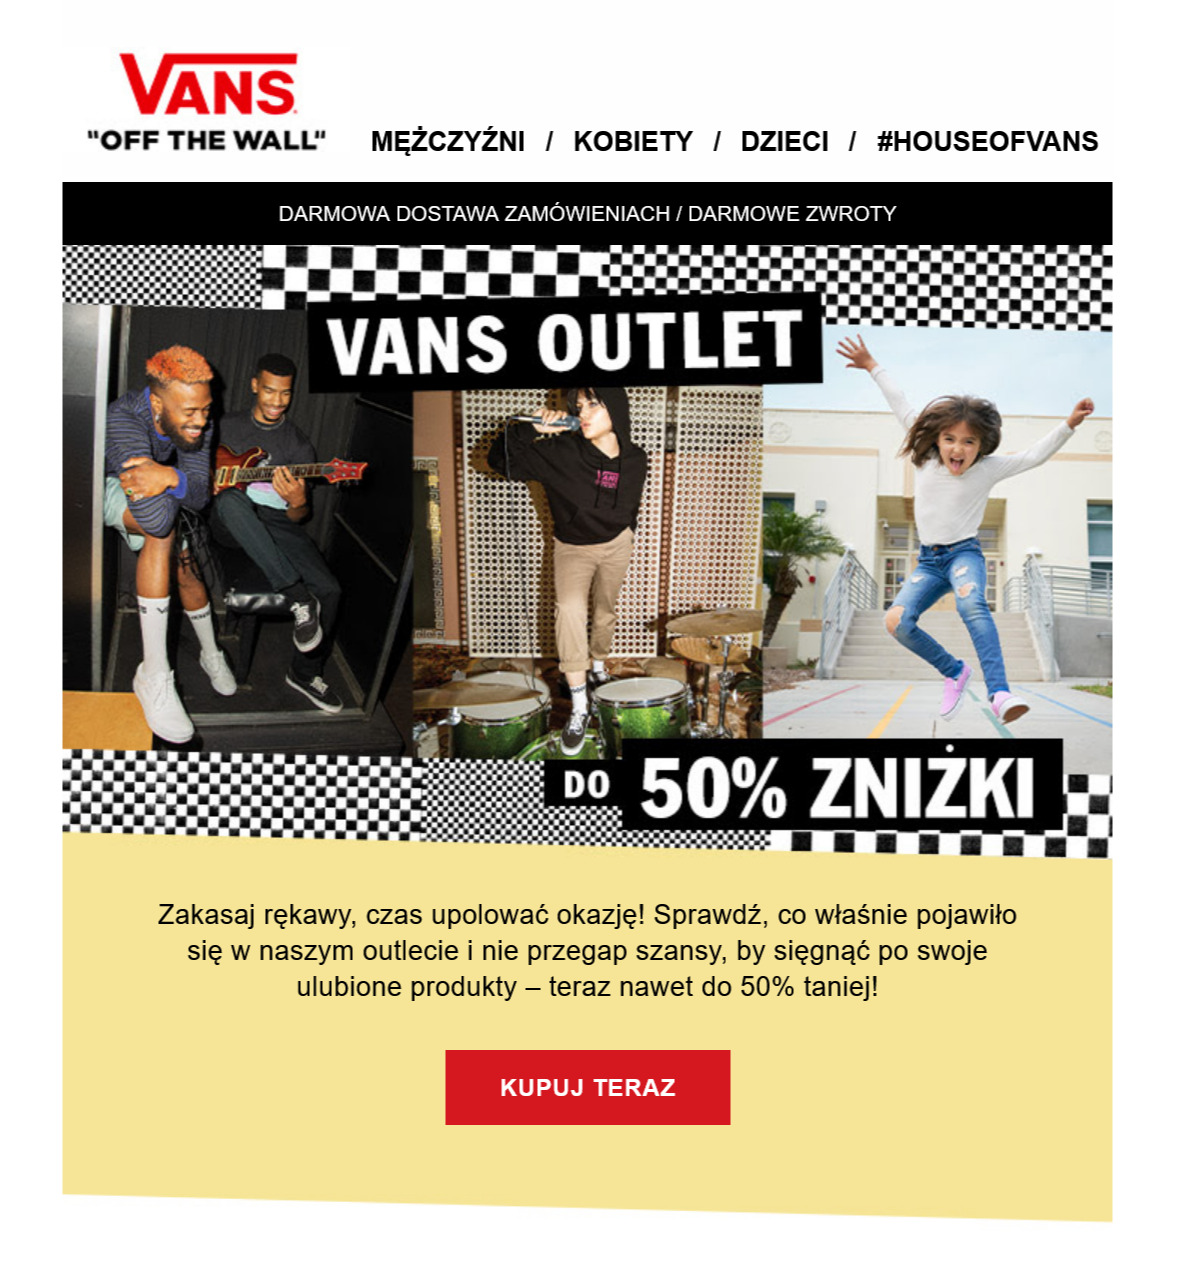 Vans ad with guys playing guitar, young woman singing, little girl excited